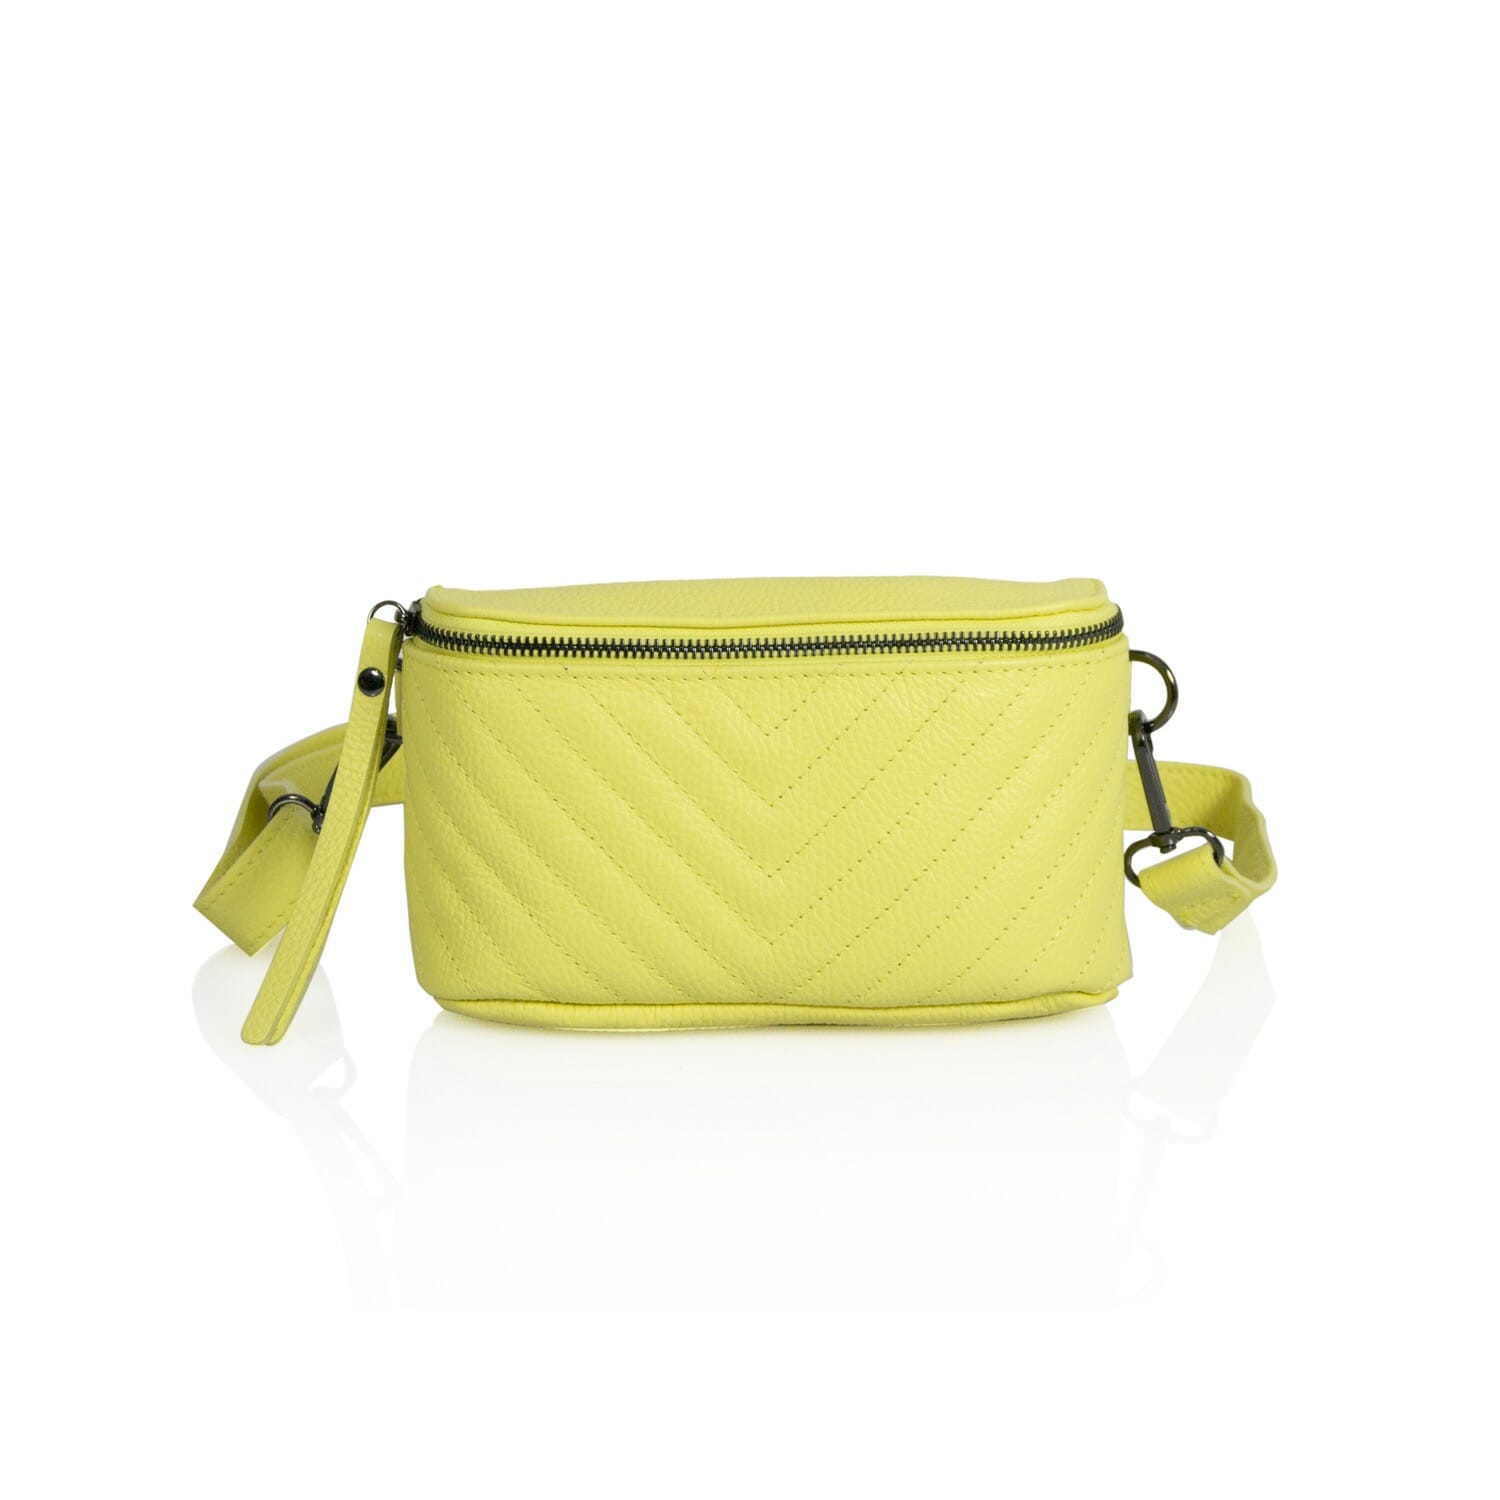 Sofia Quilted Leather Shoulder Bag - YELLOW